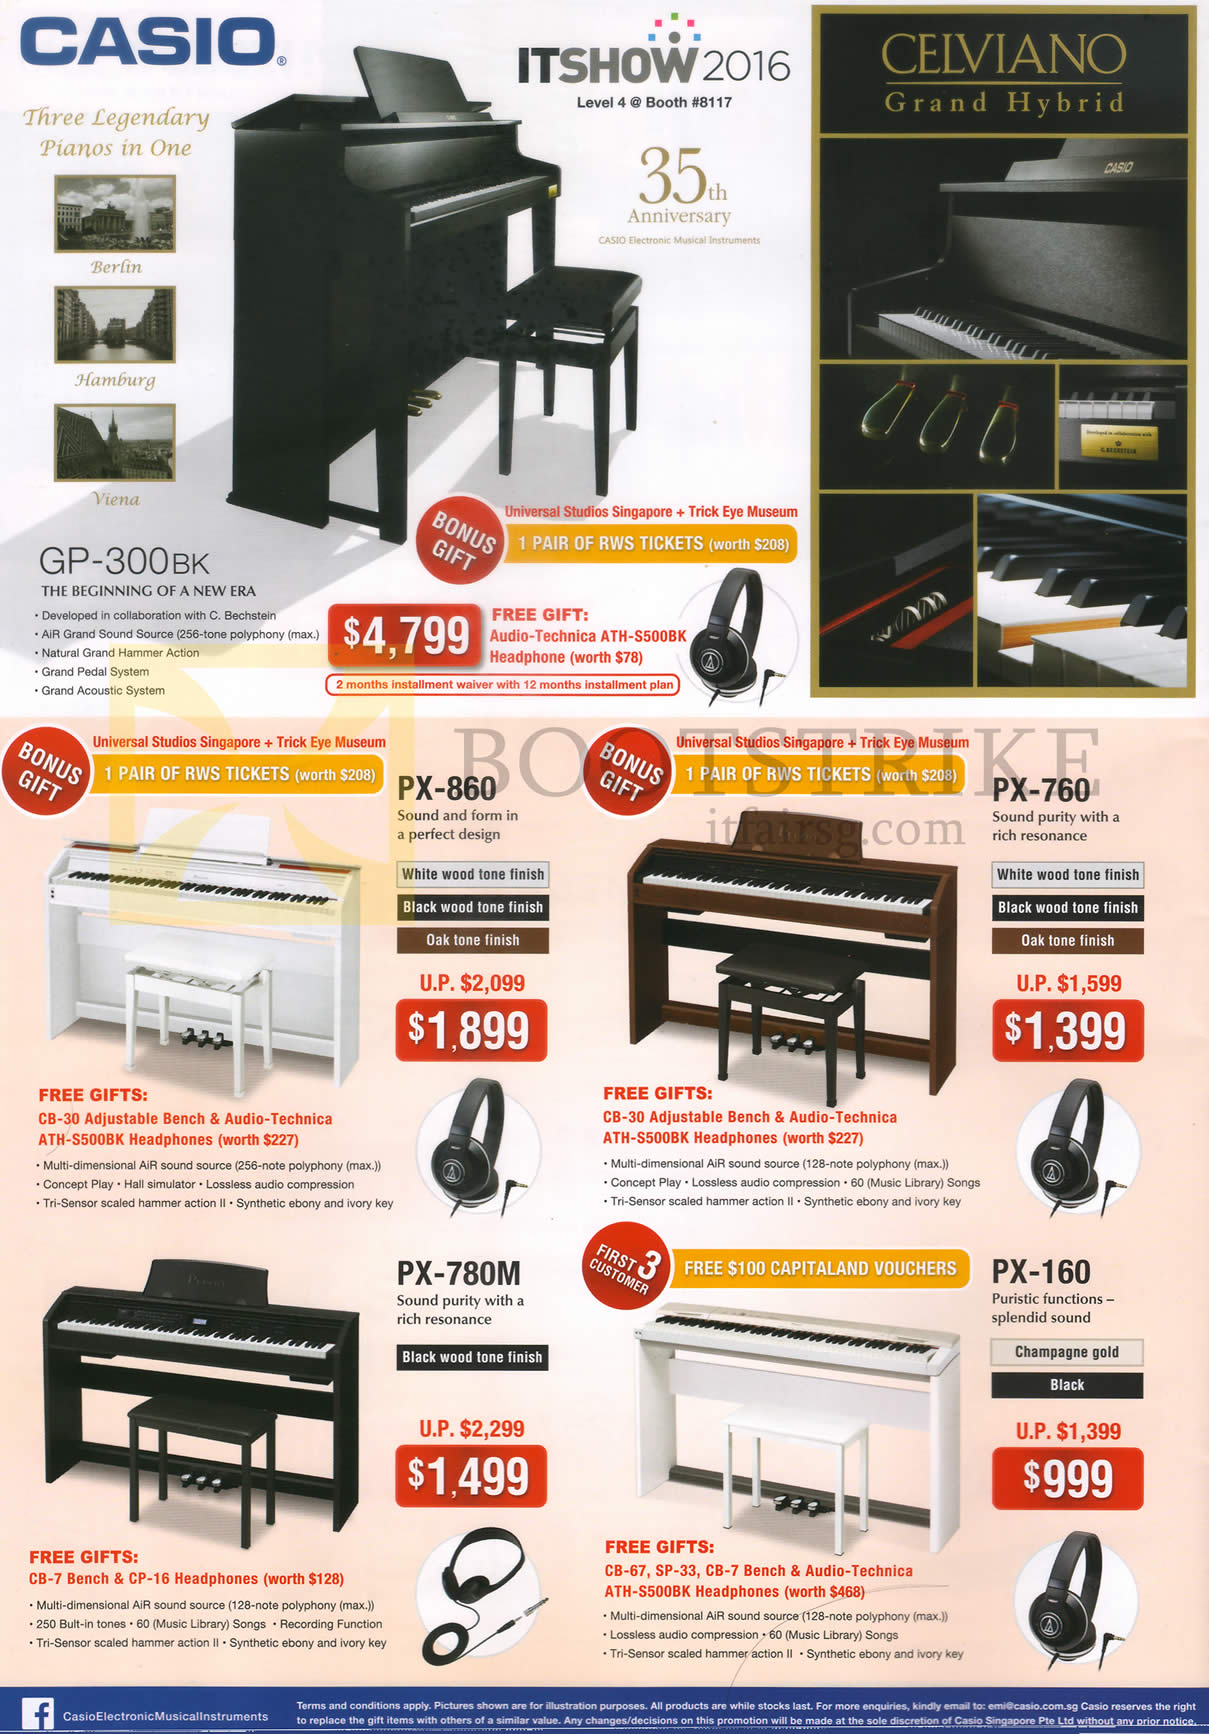 IT SHOW 2016 price list image brochure of Casio Music Keyboards GP-300BK, PX-860, 760, 780M, 160